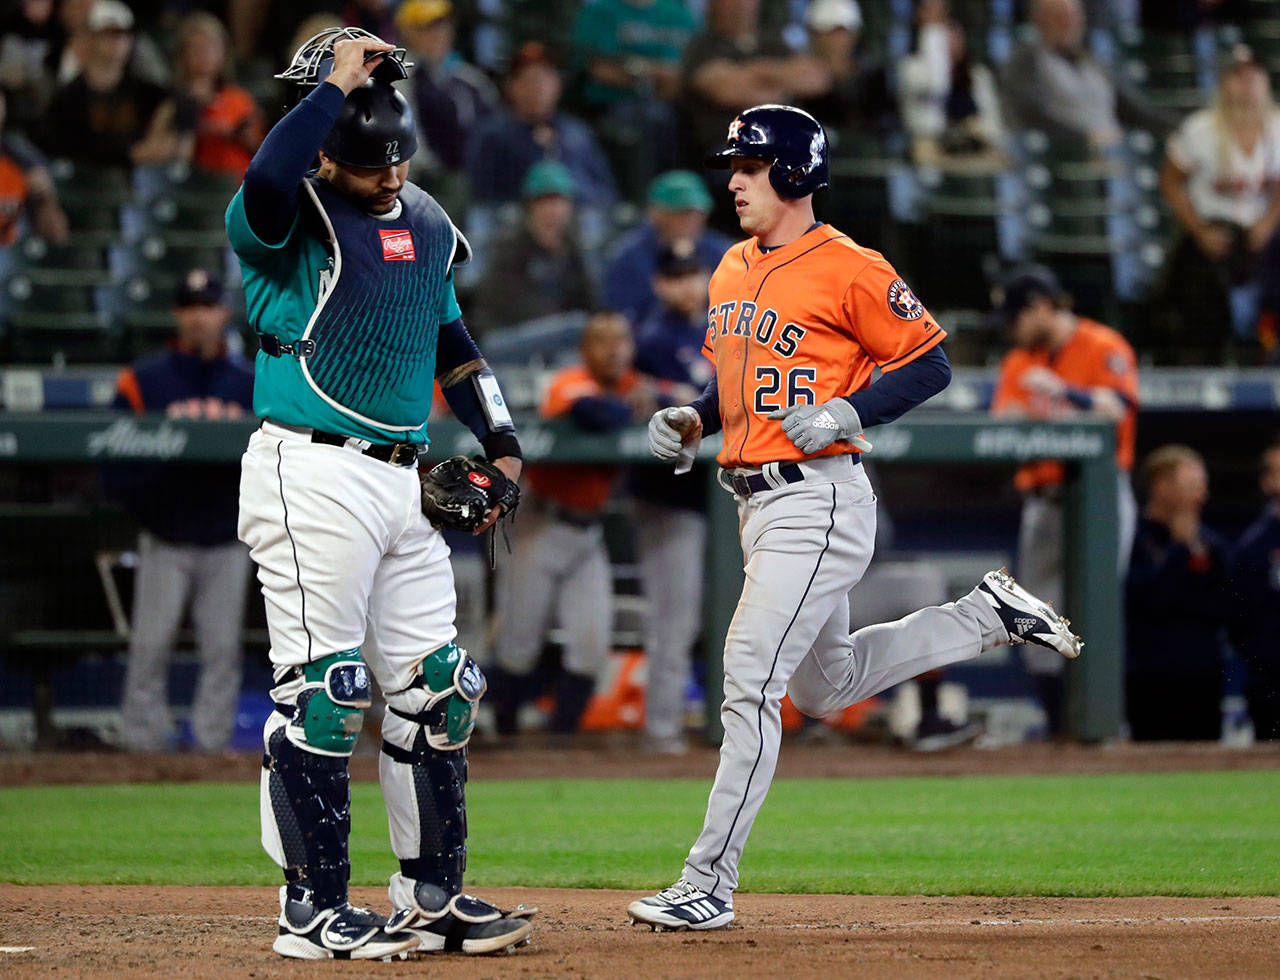 Mariners catcher Omar Narvaez (left) looks down as the Astros’ Myles Straw scores during the 14th inning of a game on June 6, 2019, in Seattle. (AP Photo/Elaine Thompson)